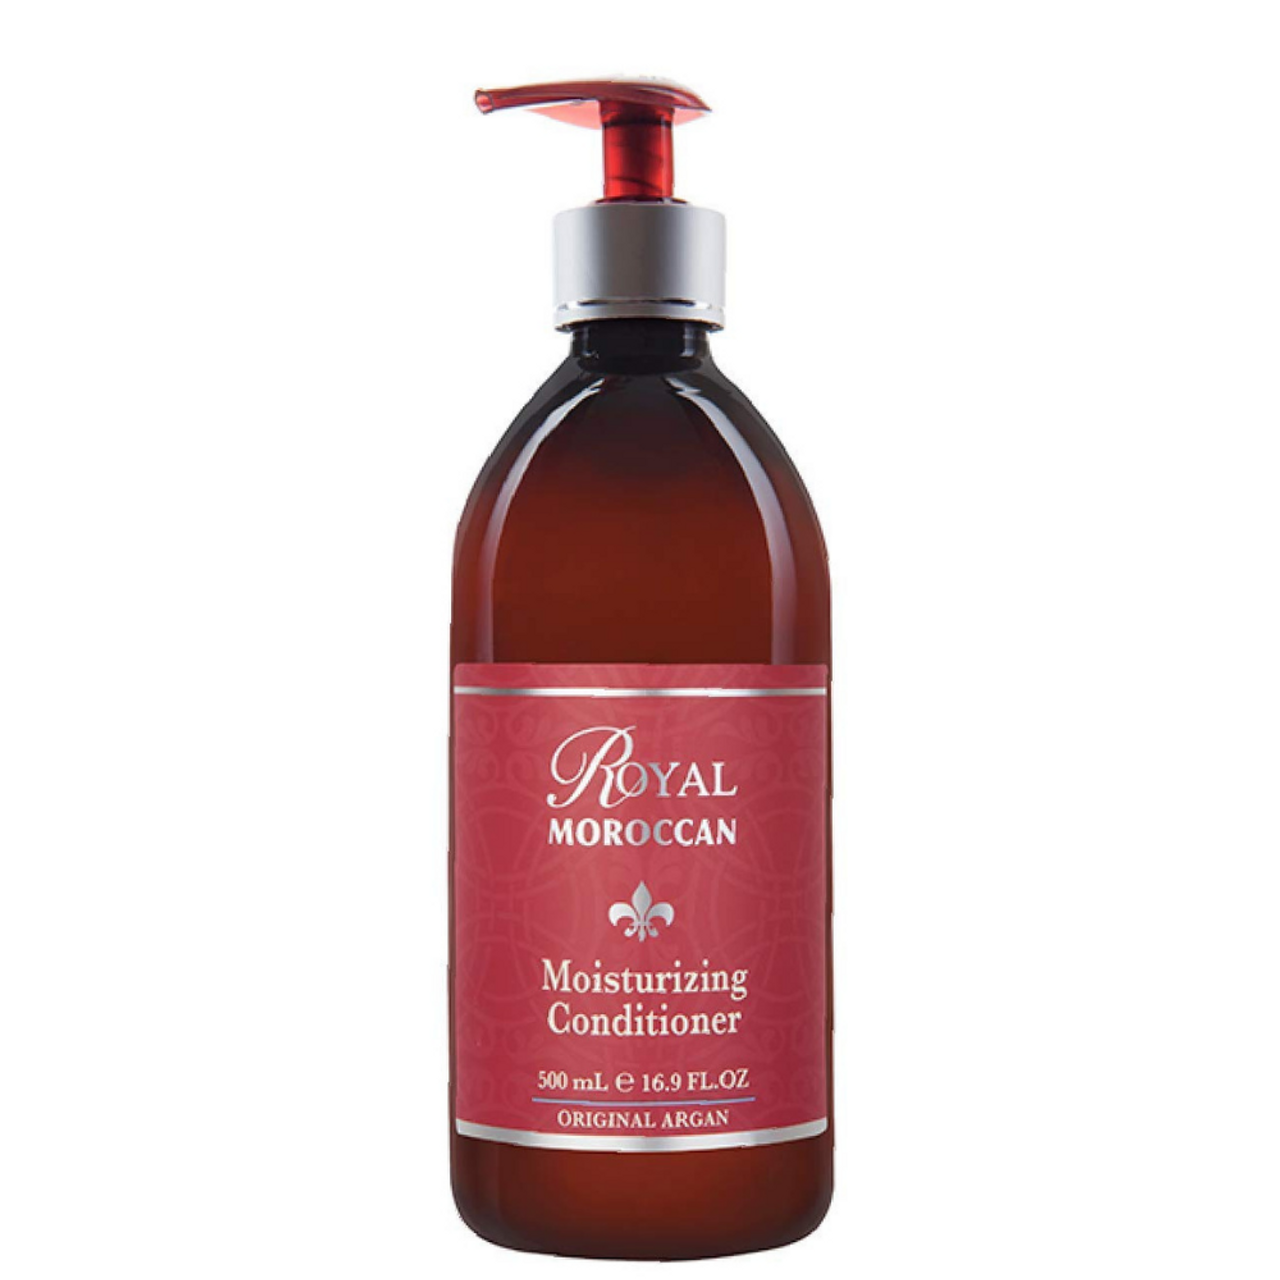 https://cdn11.bigcommerce.com/s-cwj2z5nq5n/images/stencil/1280x1280/products/129/535/RM1018_Royal_Moroccan_Moisturizing_Conditioner_500ML__57719.1653095193.png?c=1